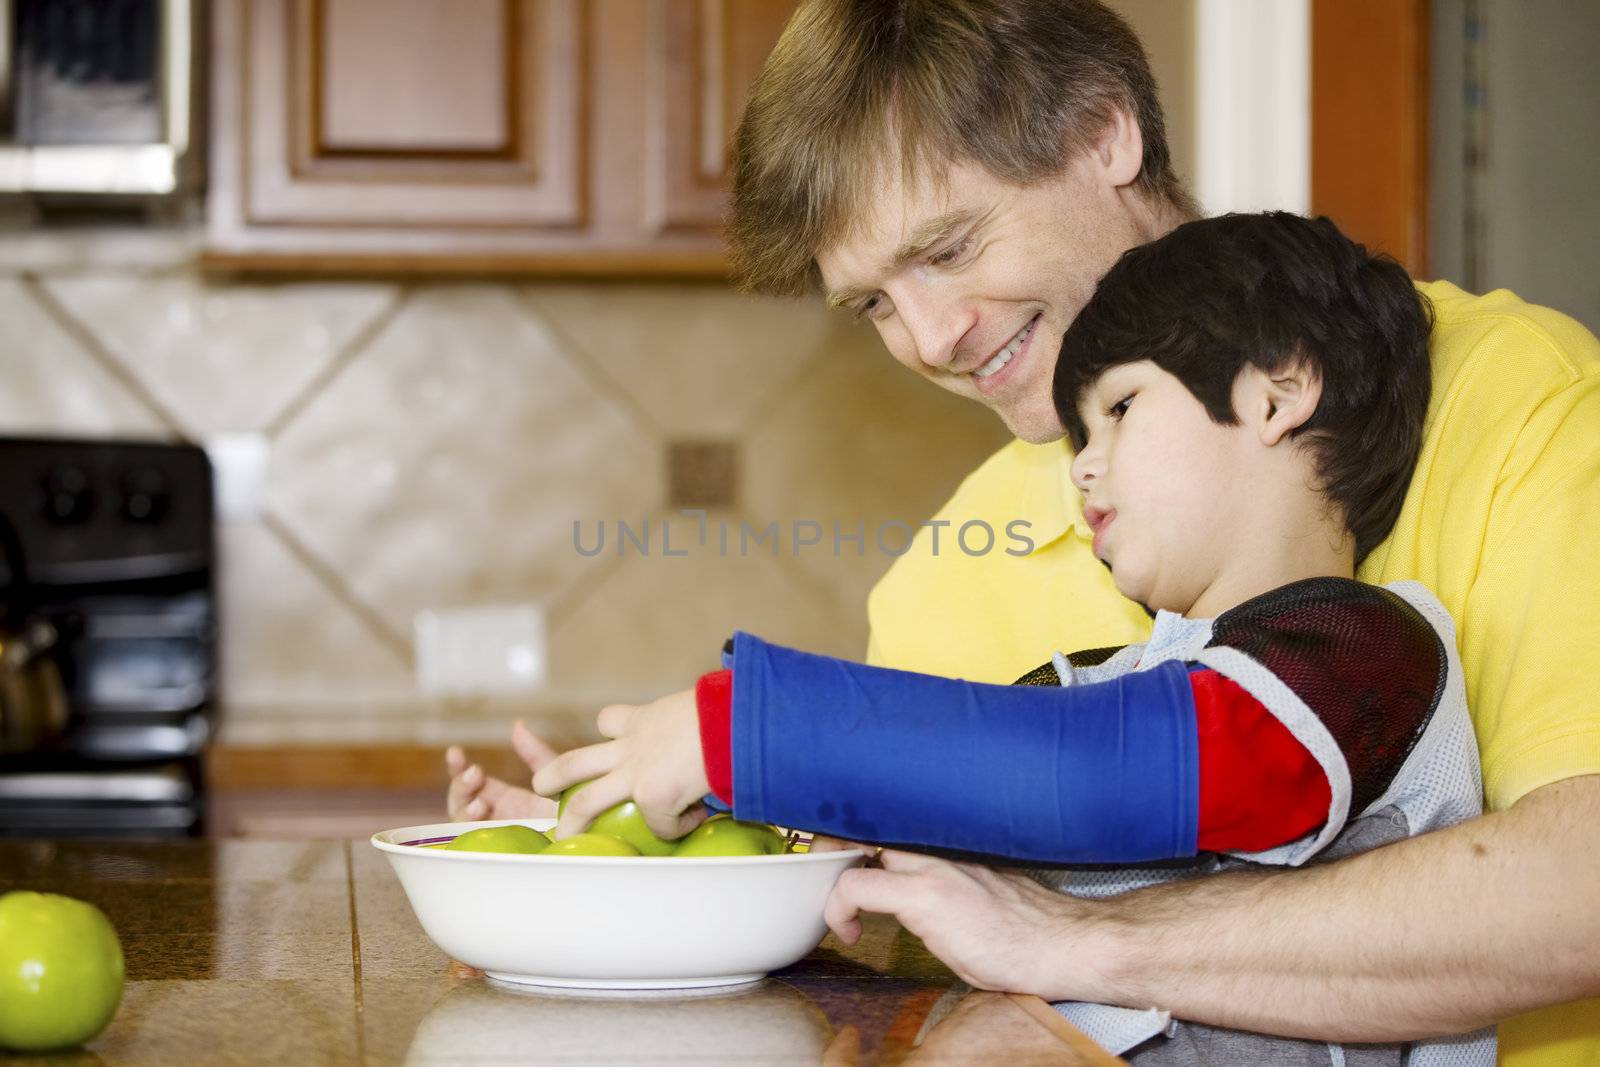 Father helping disabled son putting fruit into bowl in the kitchen. Son has cerebral palsy.